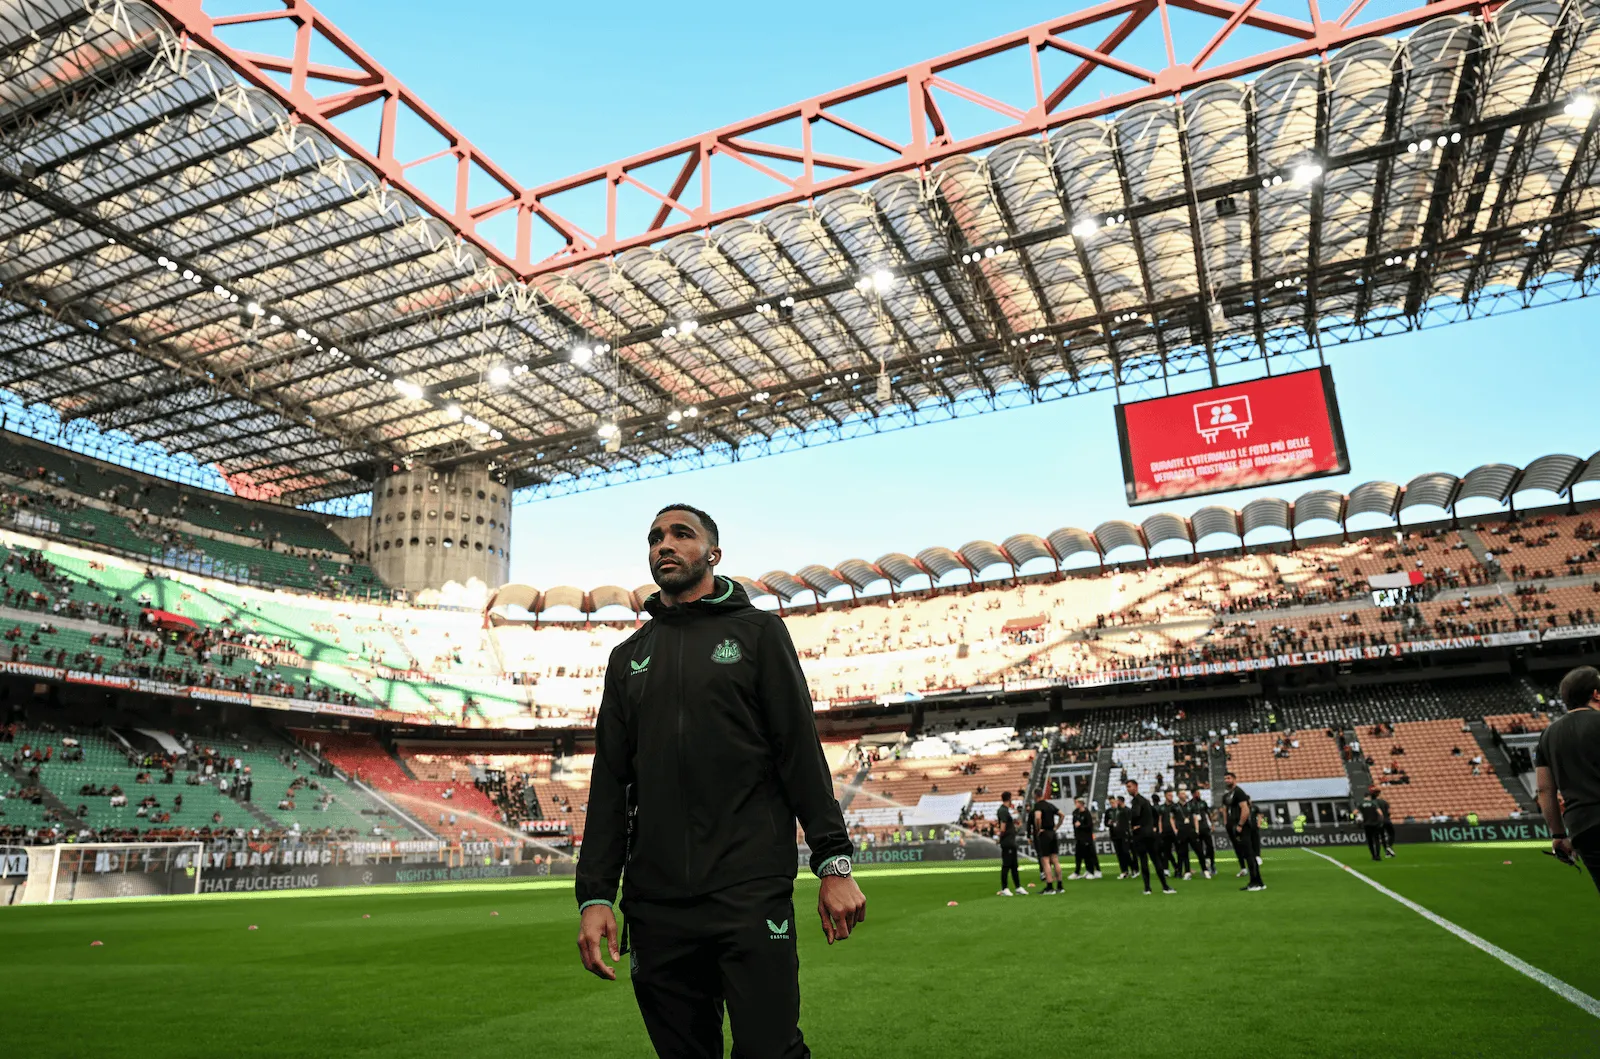 Newcastle United prepare for their Champions League tie against AC Milan.